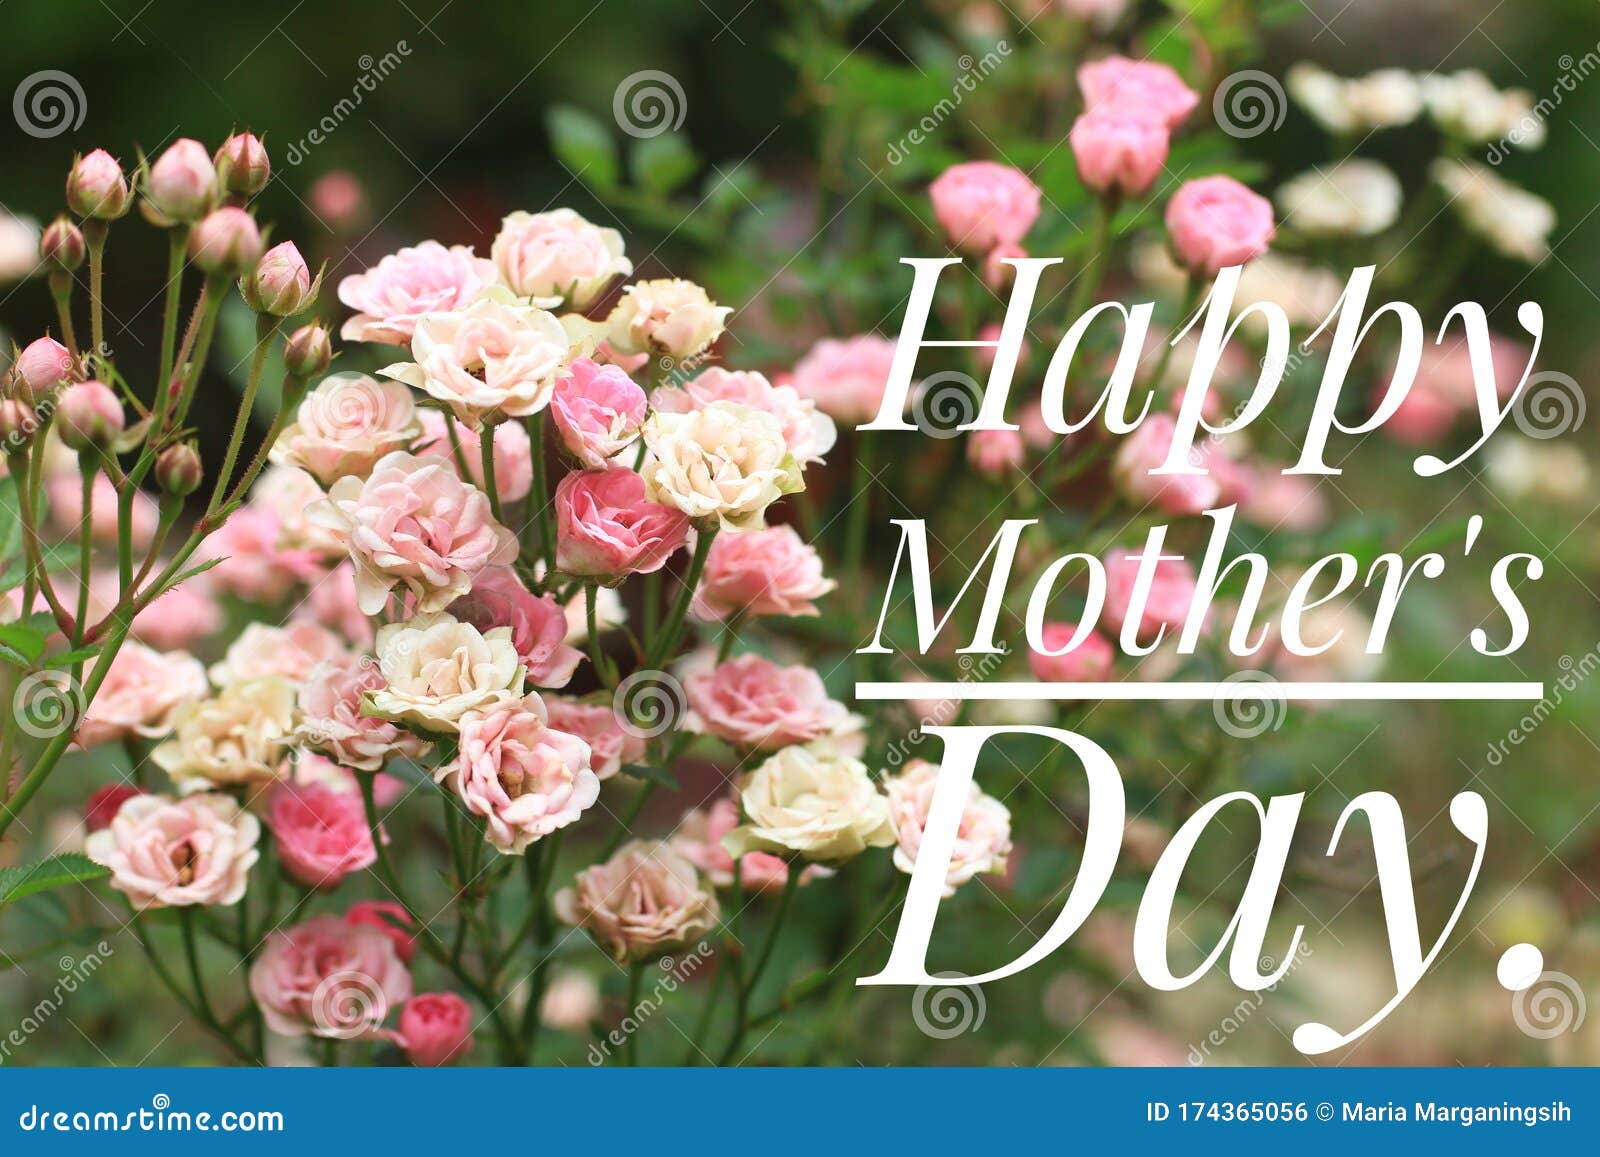 104 Mothers Day Happy Saying Stock Photos - Free & Royalty-Free ...